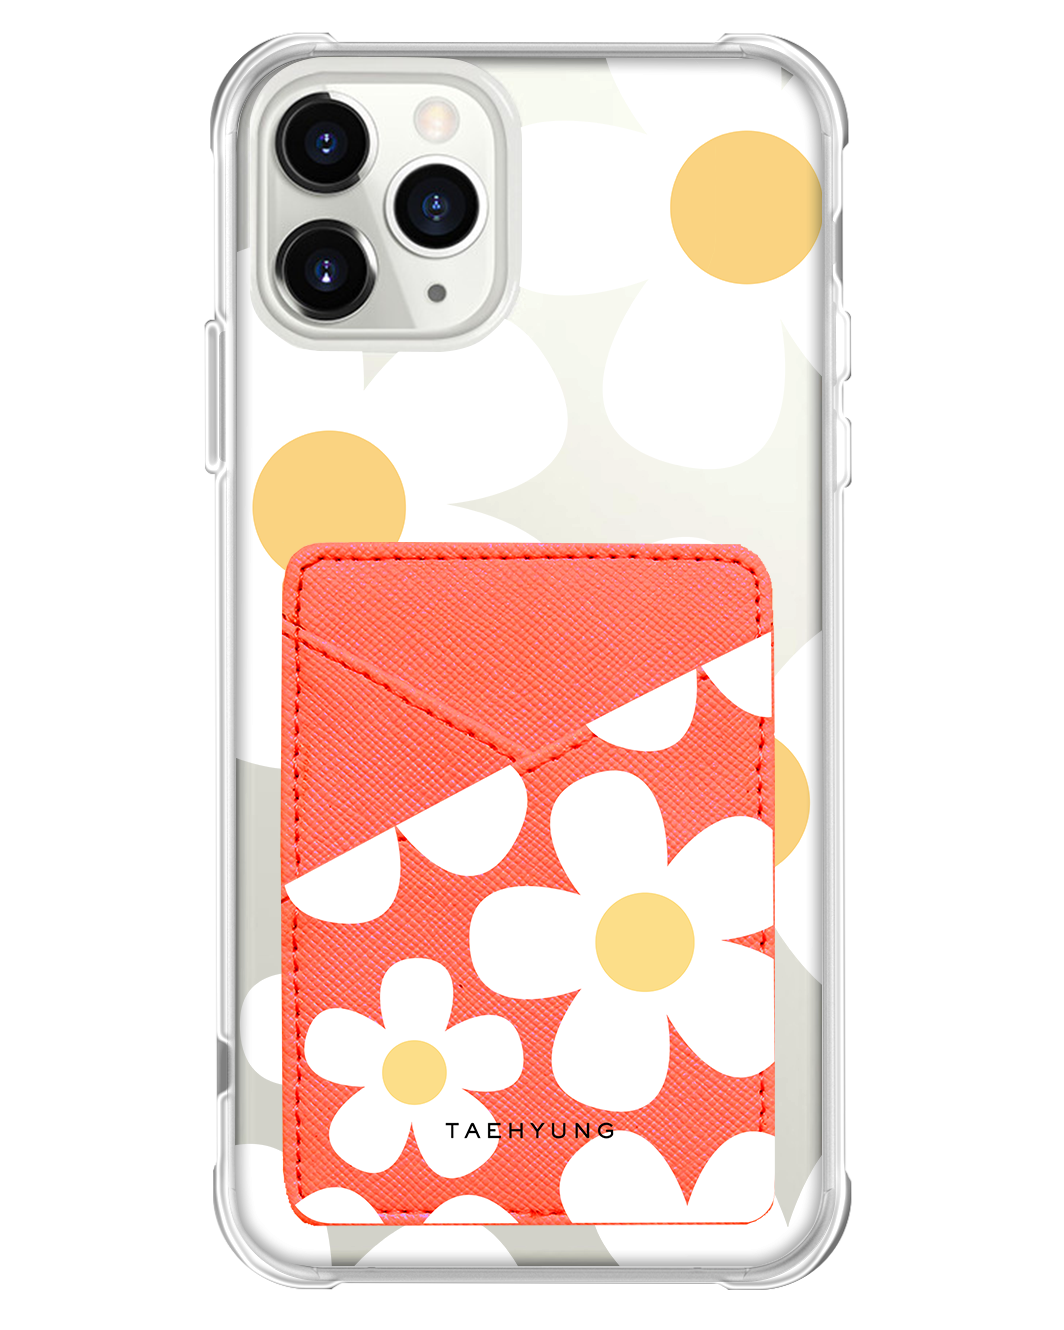 iPhone Phone Wallet Case - Daisy 1.0